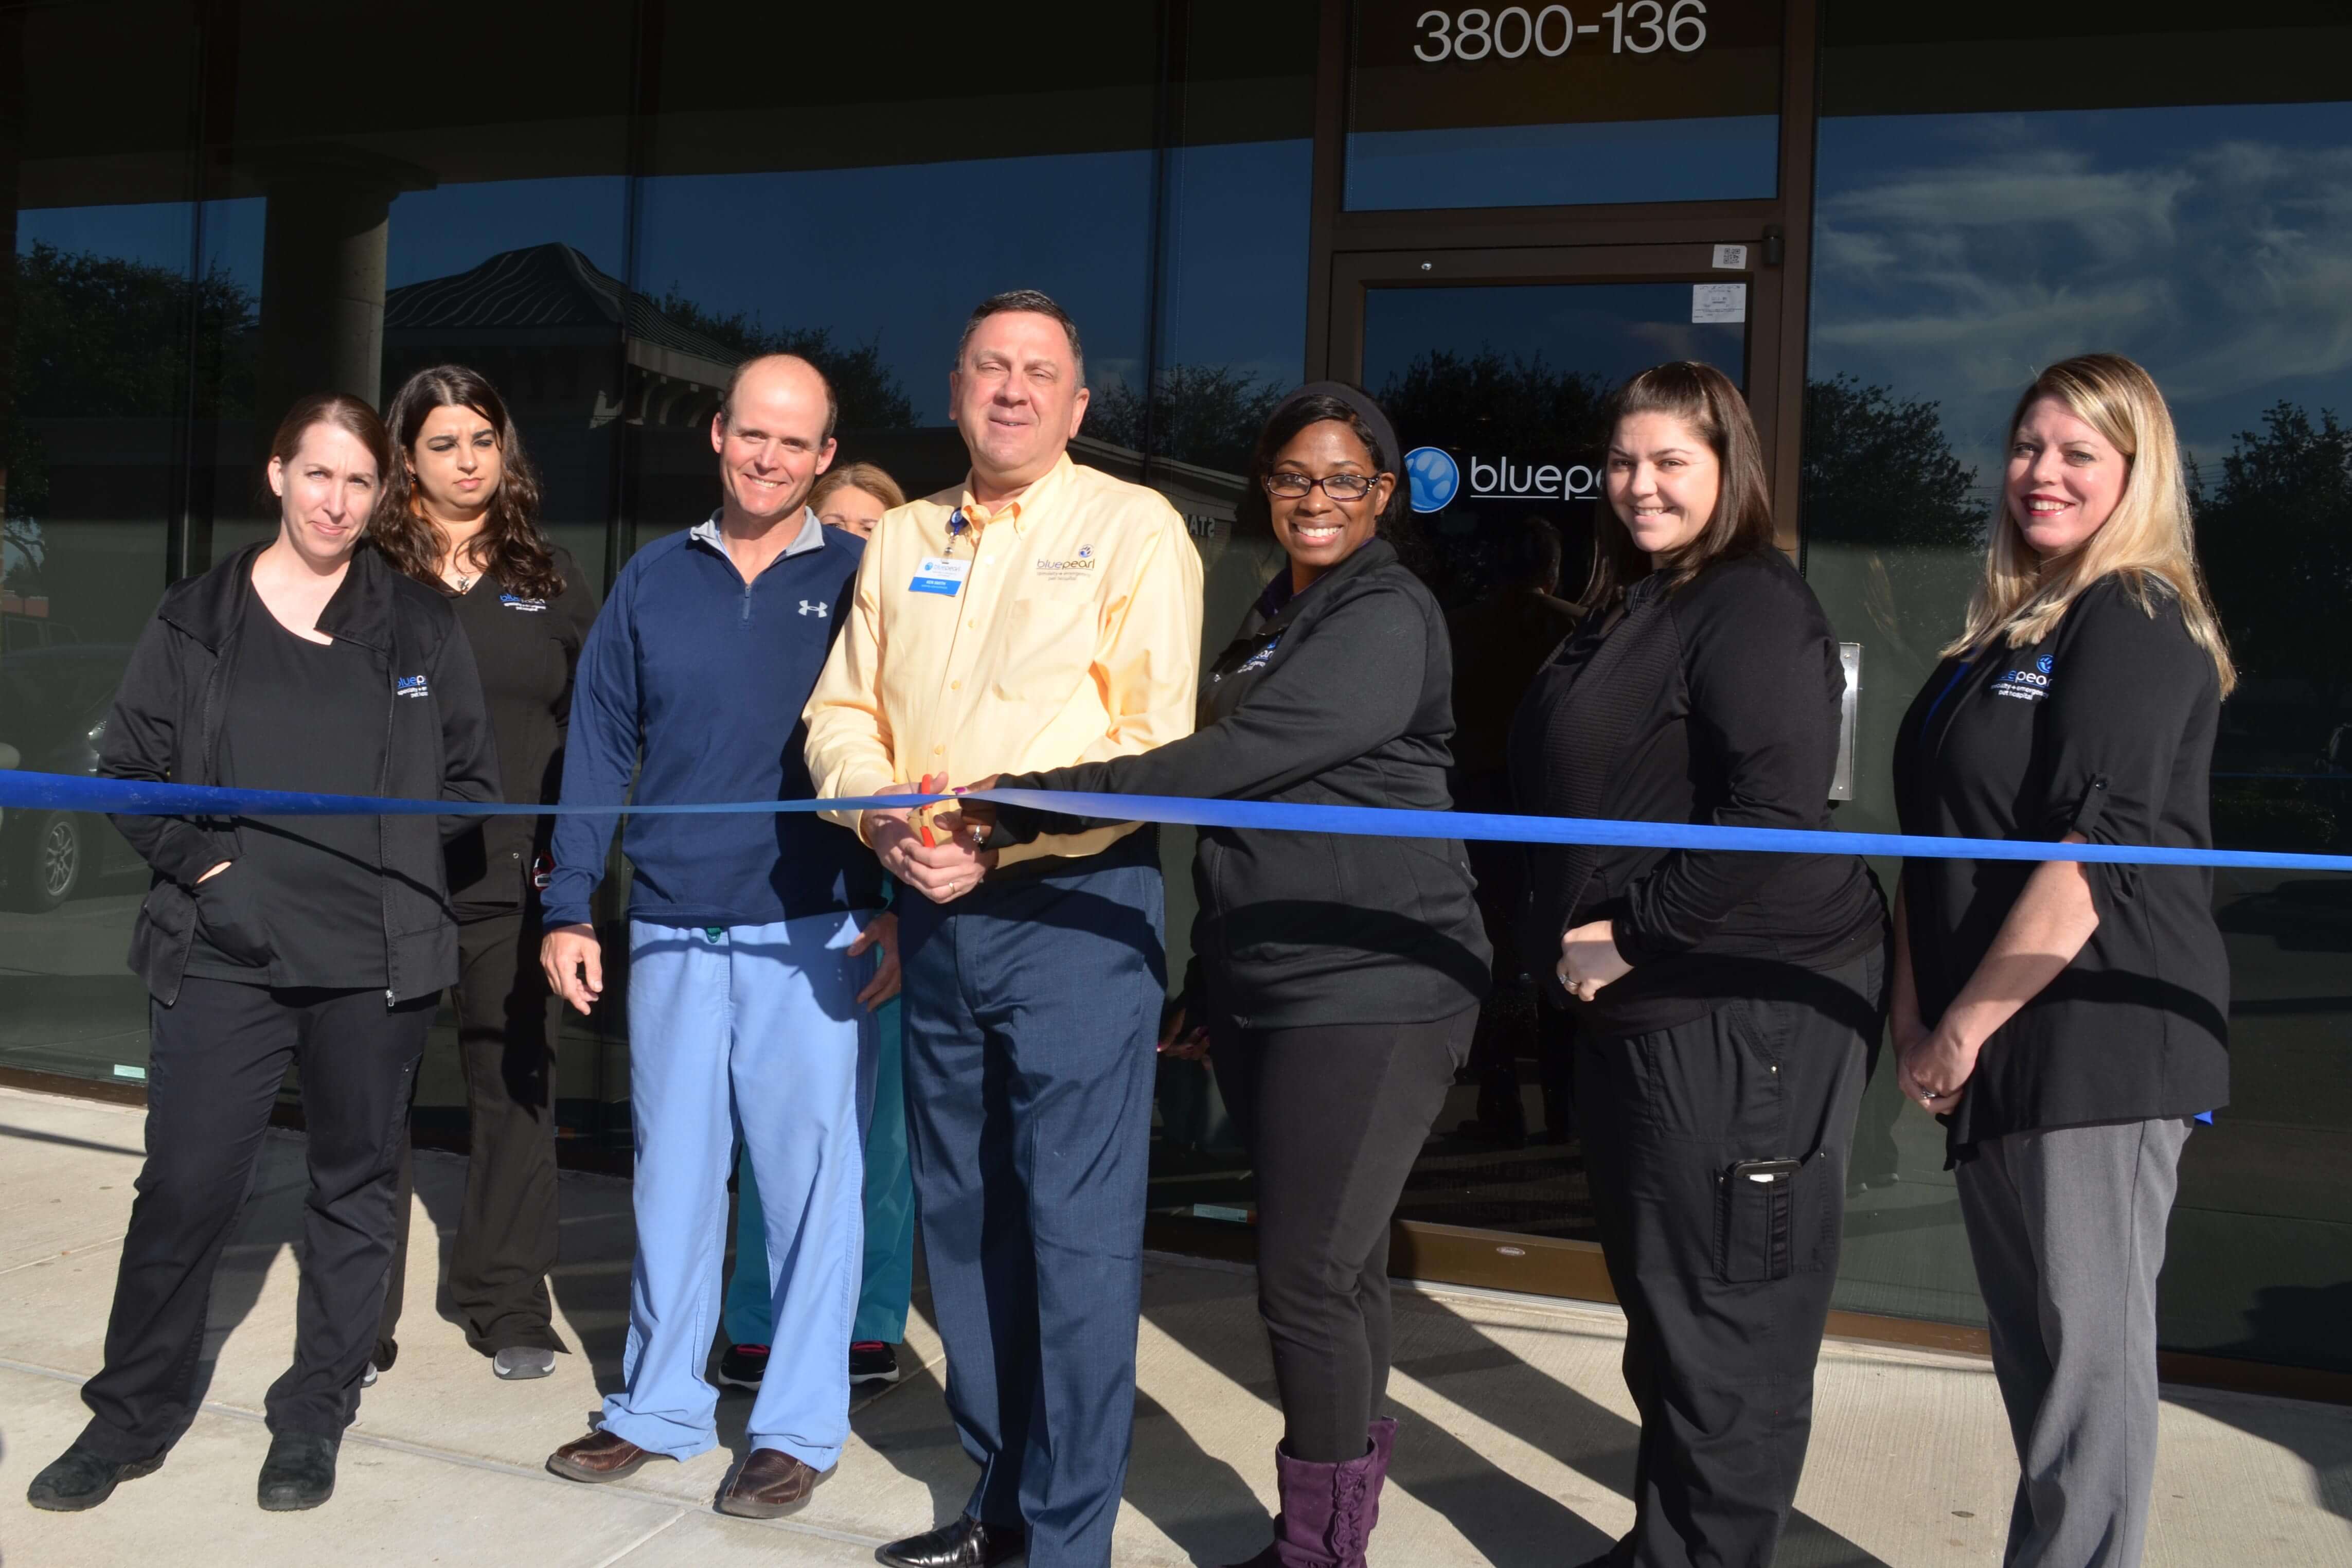 A hospital team cuts a ribbon signifying the opening of a new hospital location in Greenway, TX.